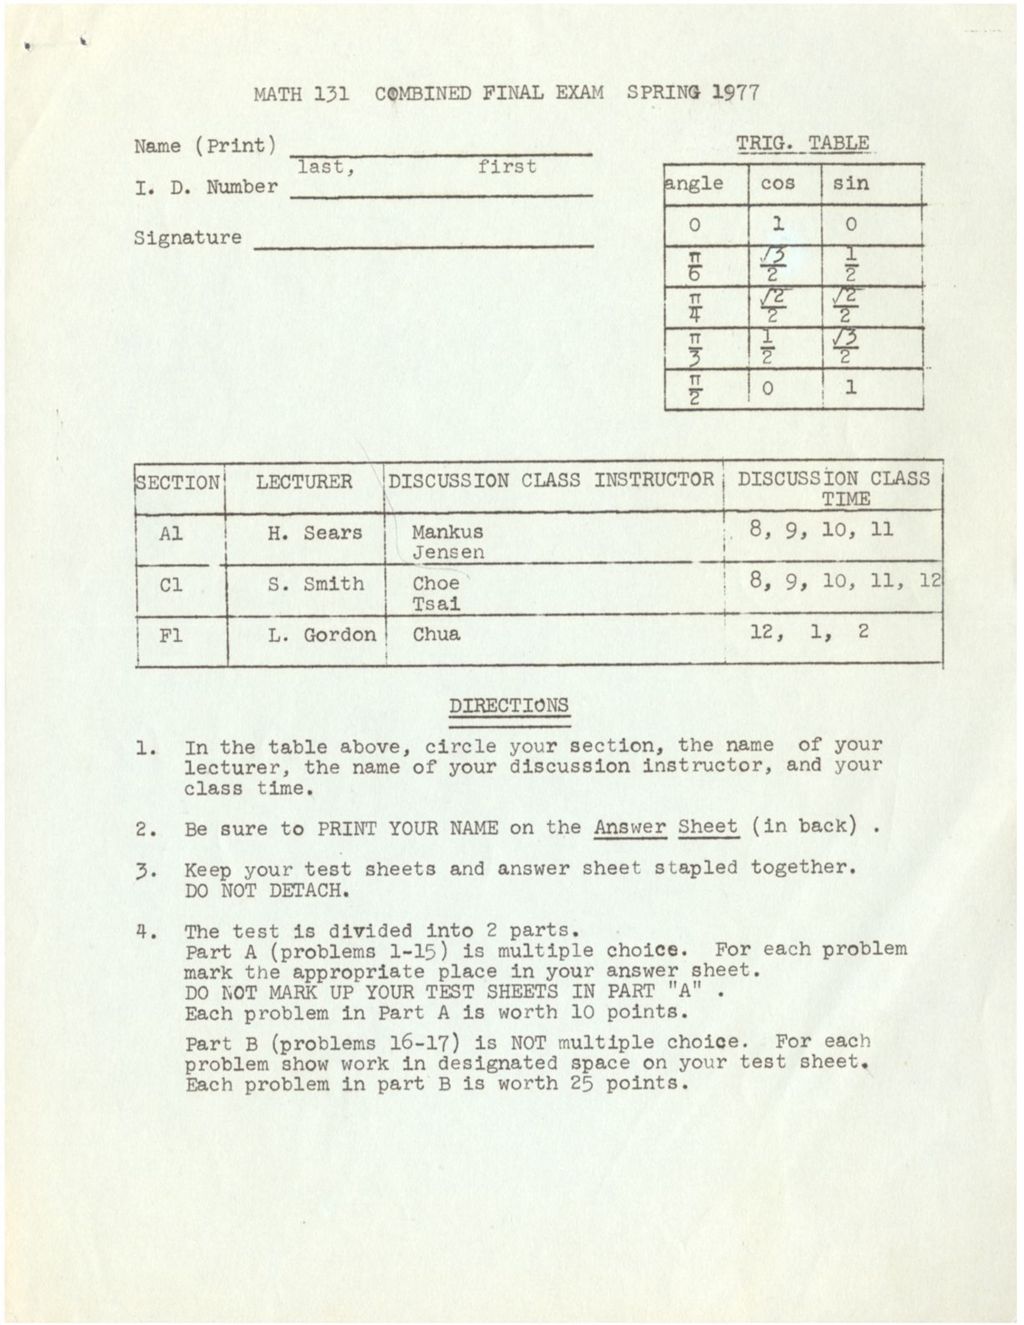 Miniature of Math 131 Combined Final Exam Spring 1977